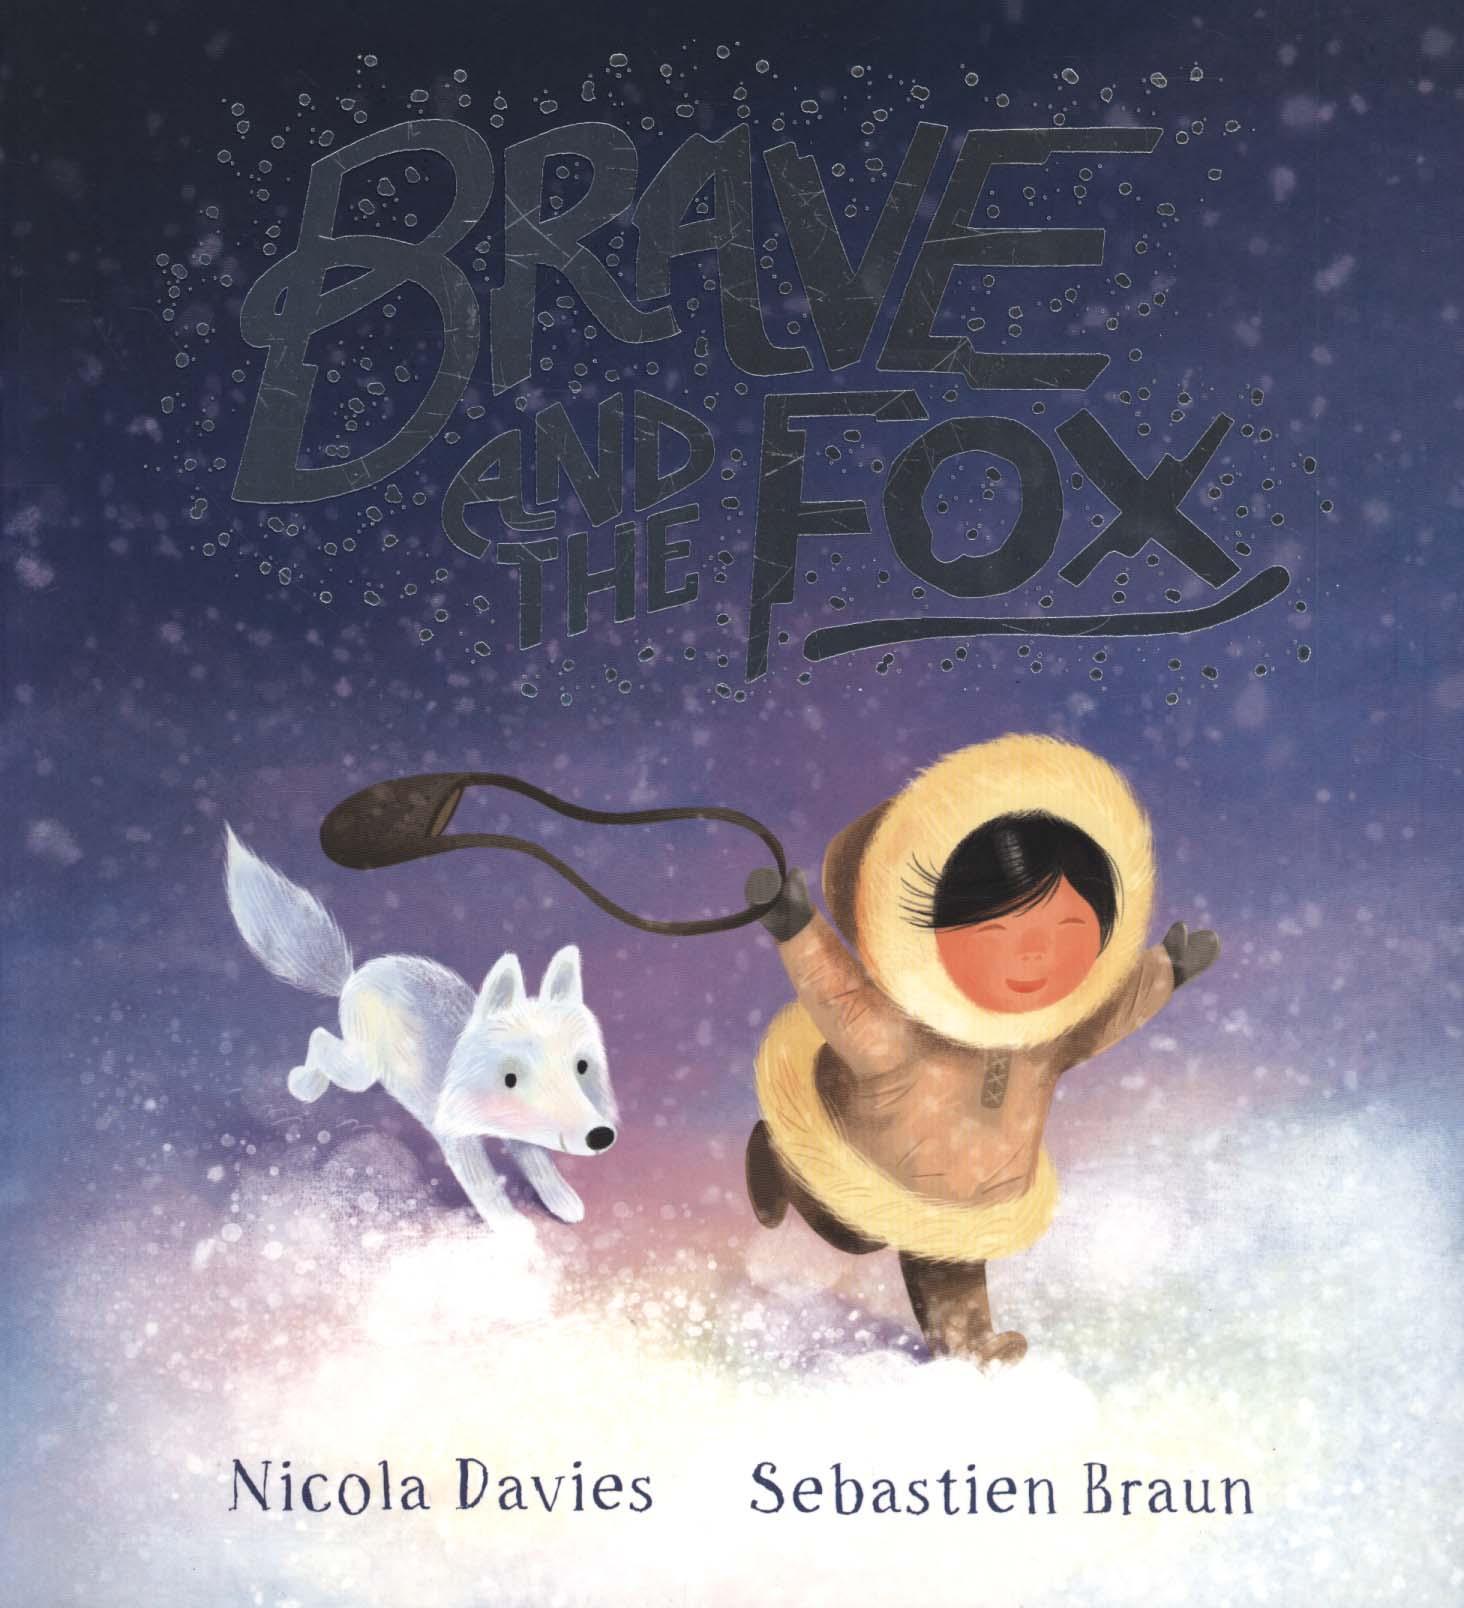 Brave and the Fox